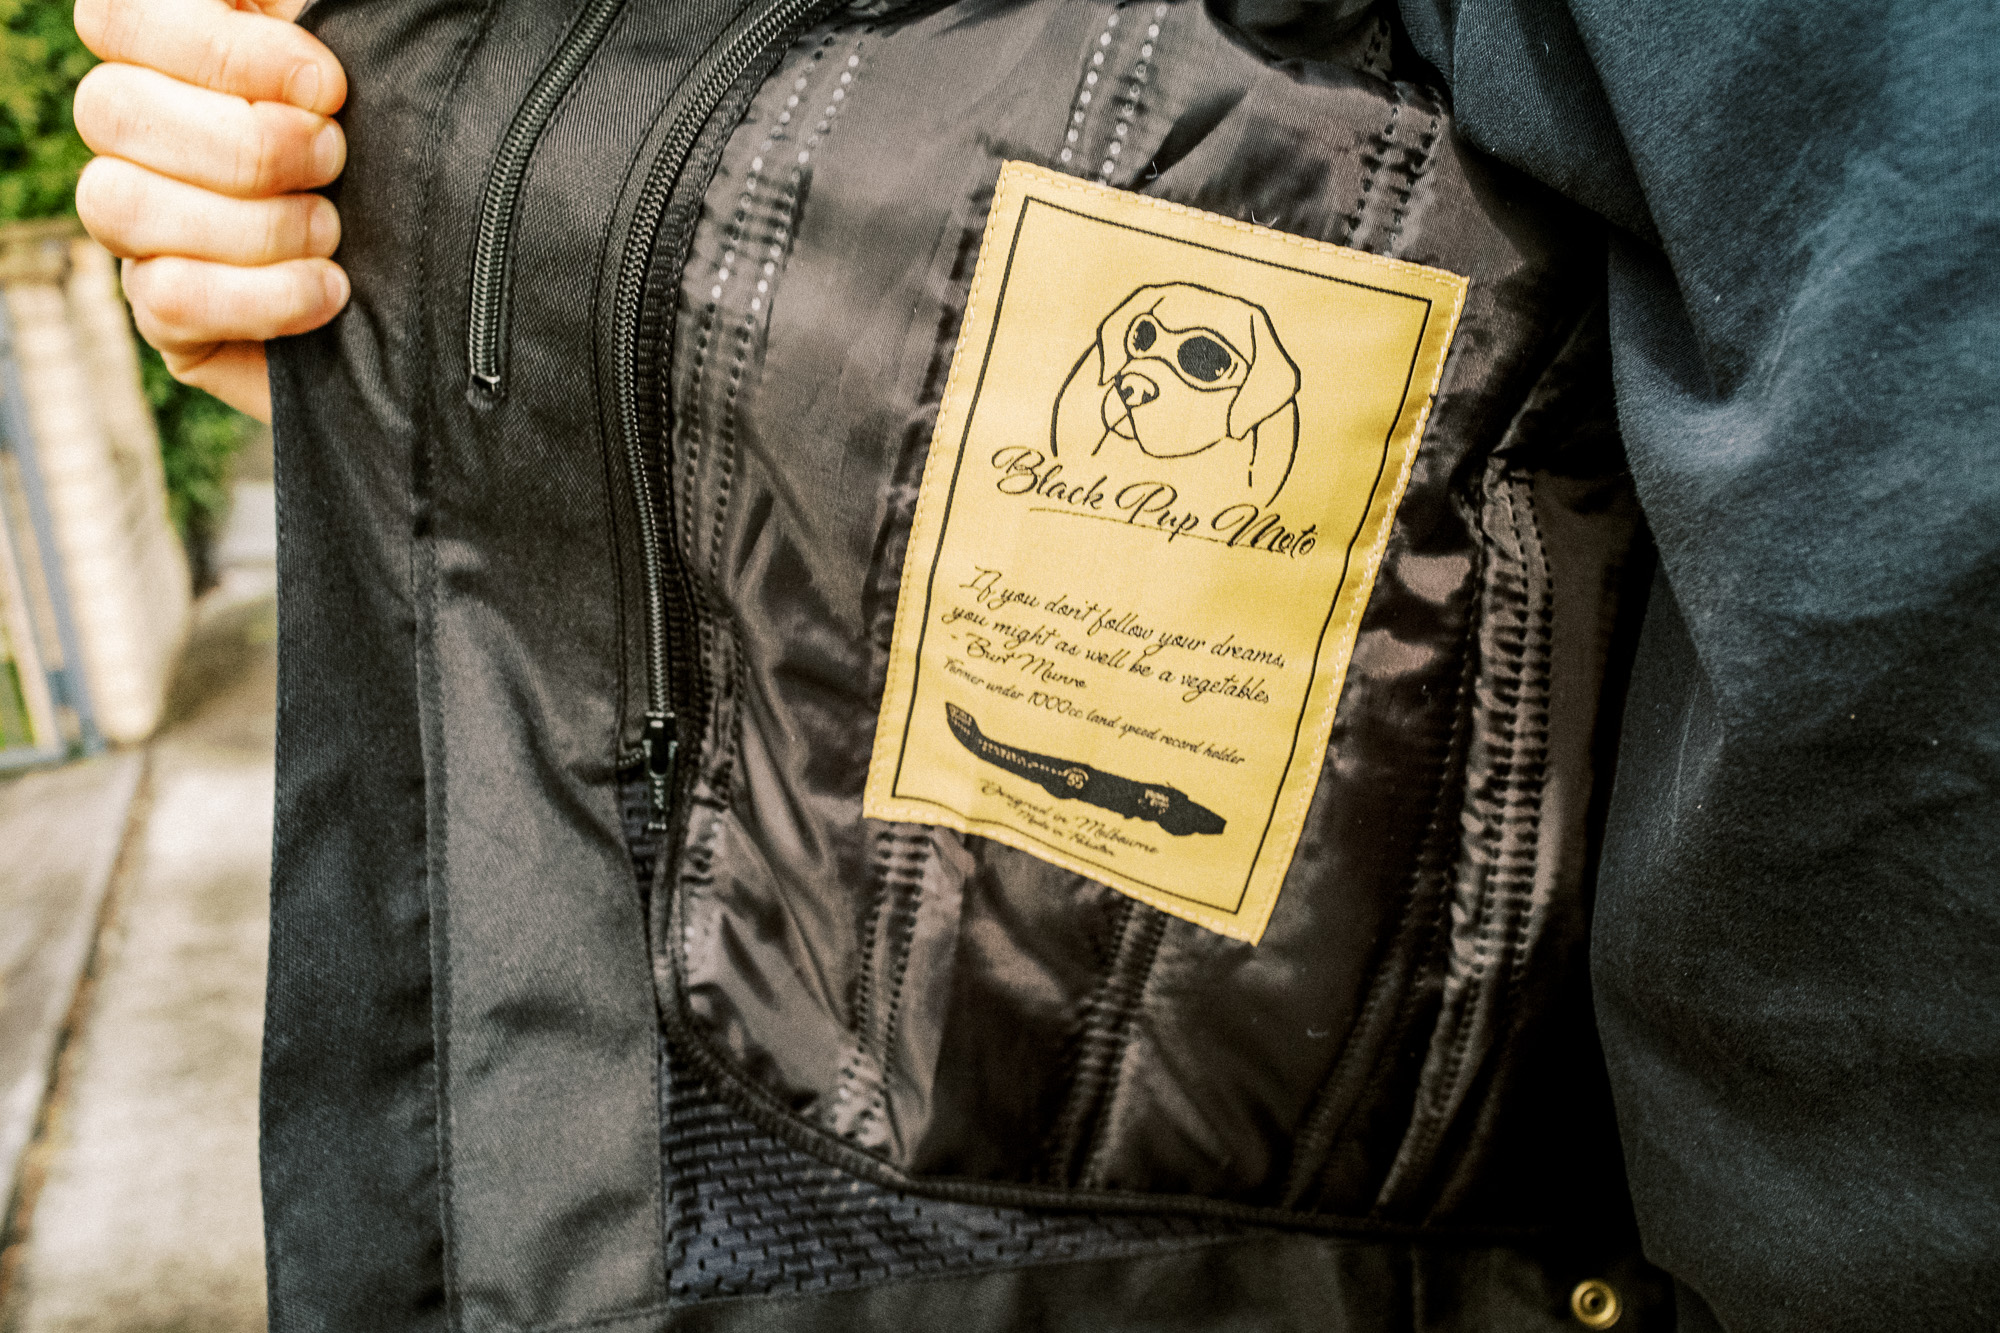 Interior label on the jacket